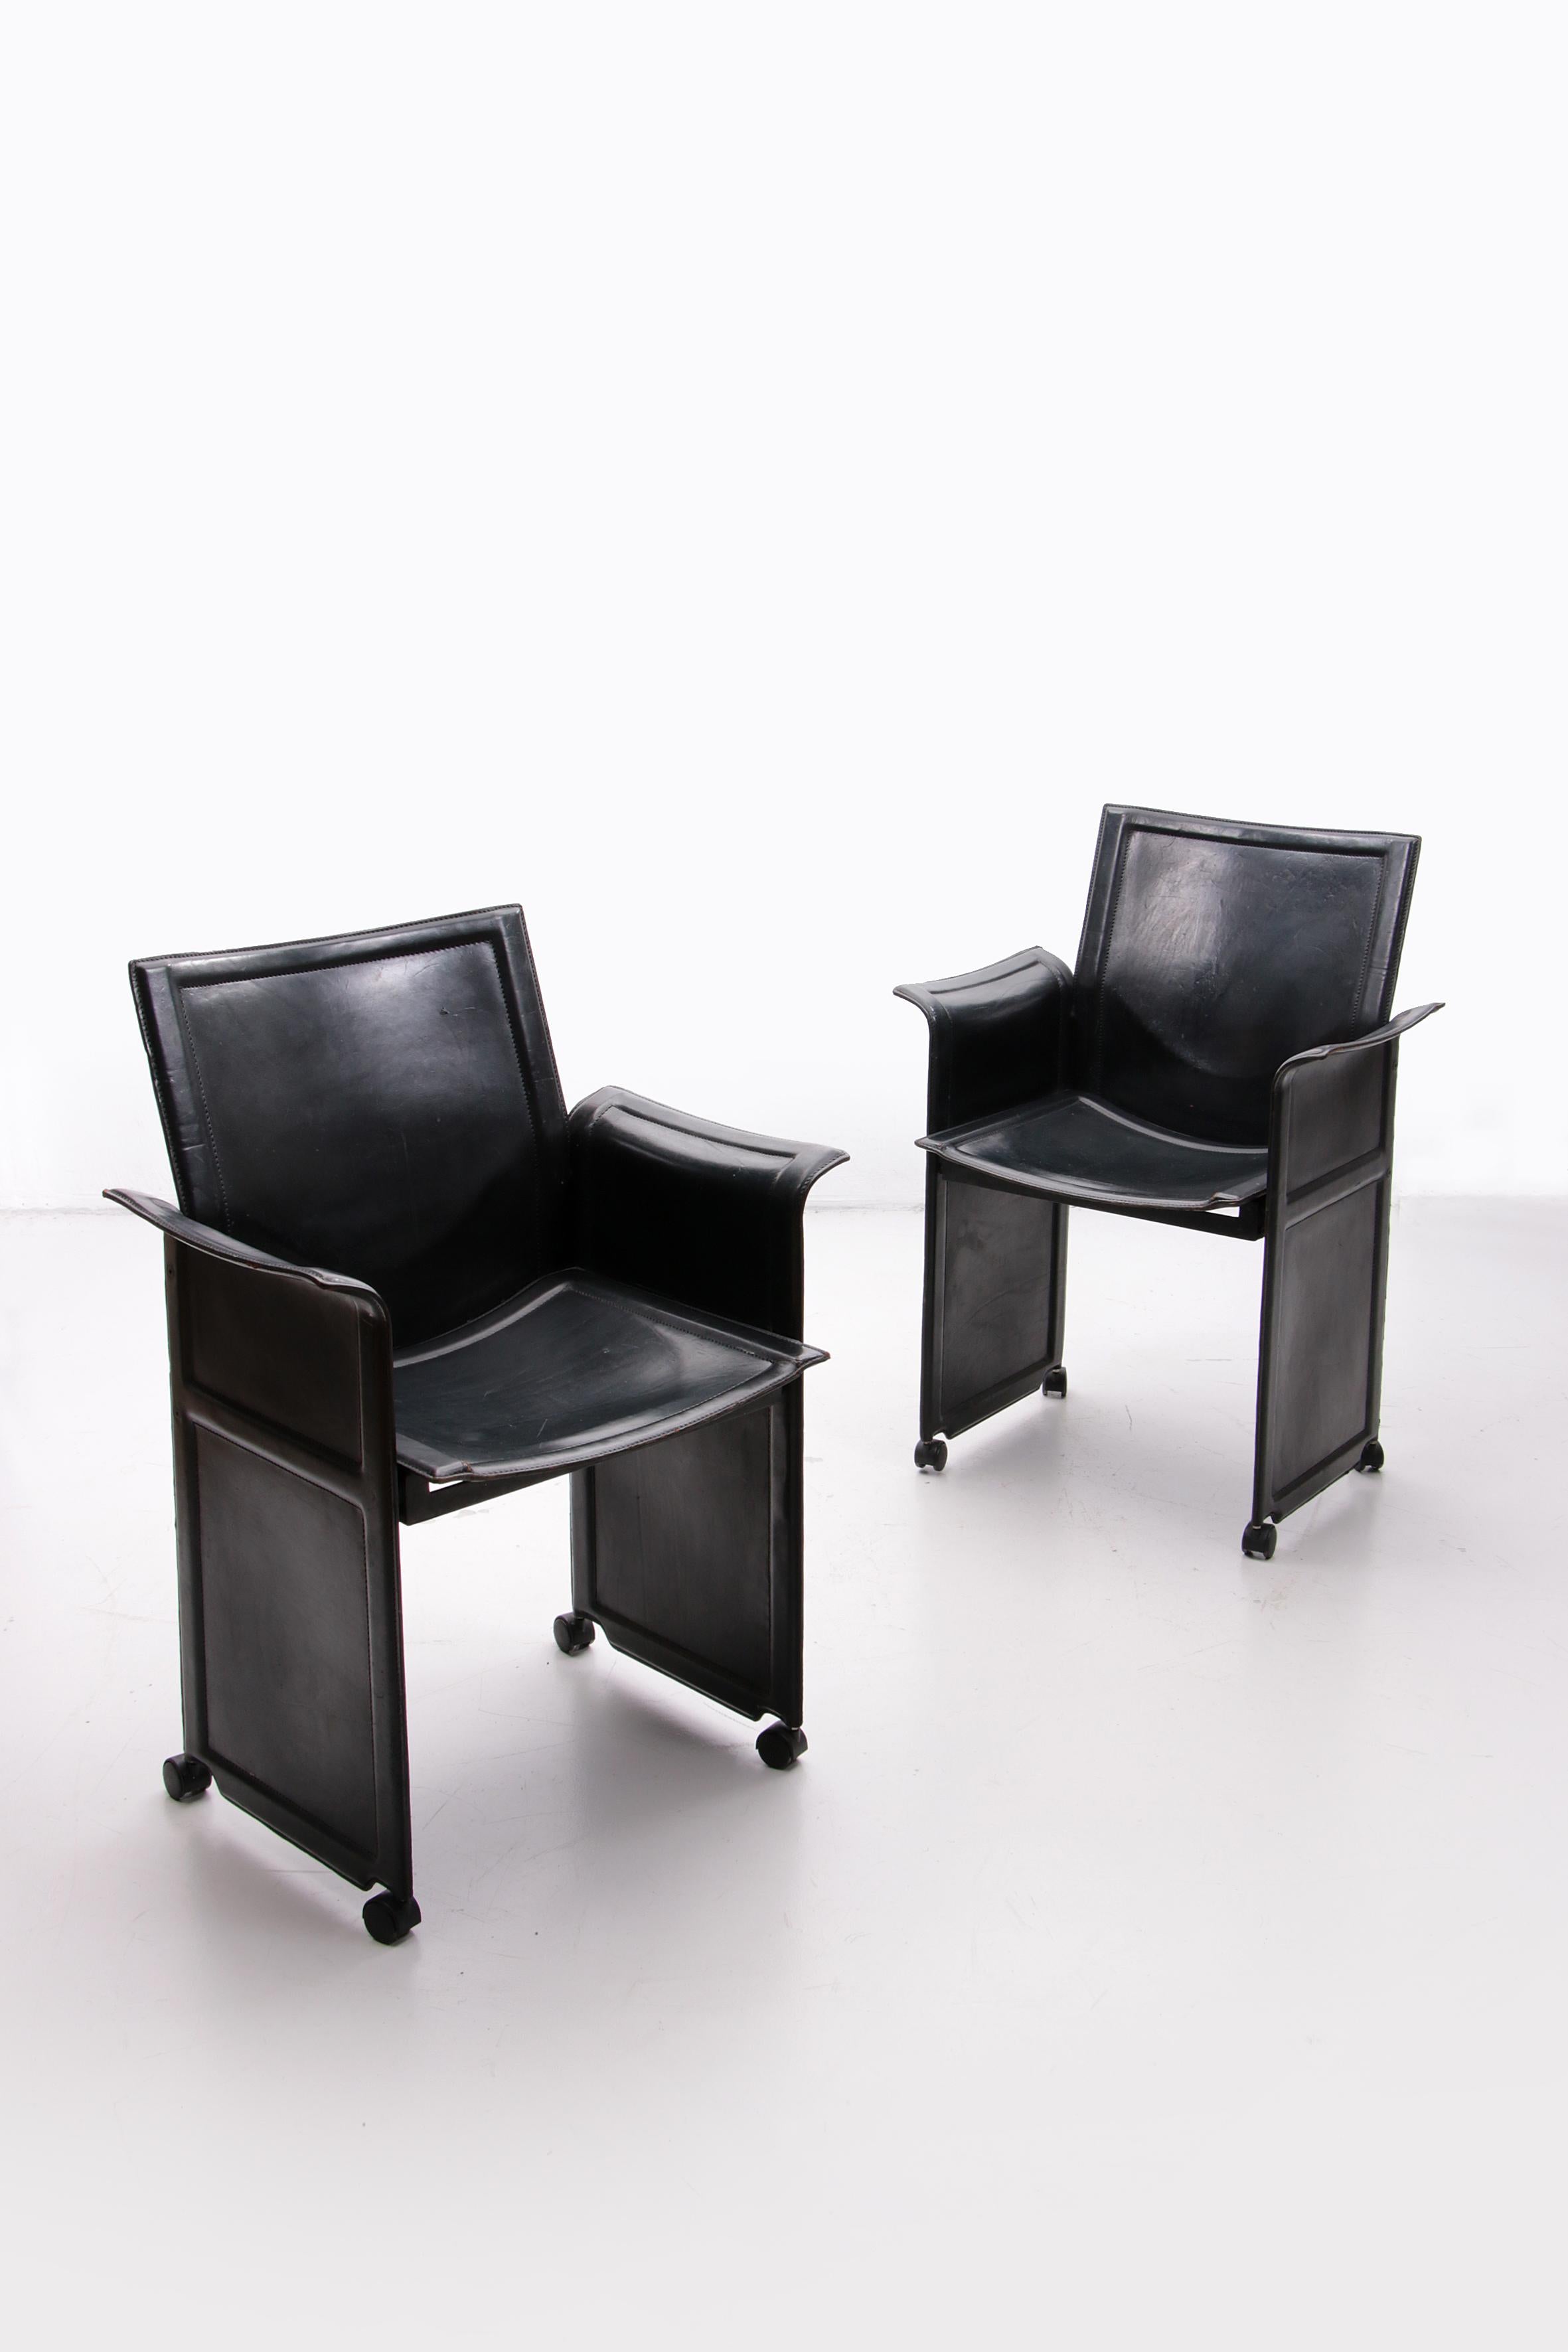 Rare dining room chairs.

The used Matteo Grassi Korium has a special appearance. The frame of the chair is fully covered with sturdy black leather. The leather is stitched and molded over metal frame panels, a type of architectural design used by